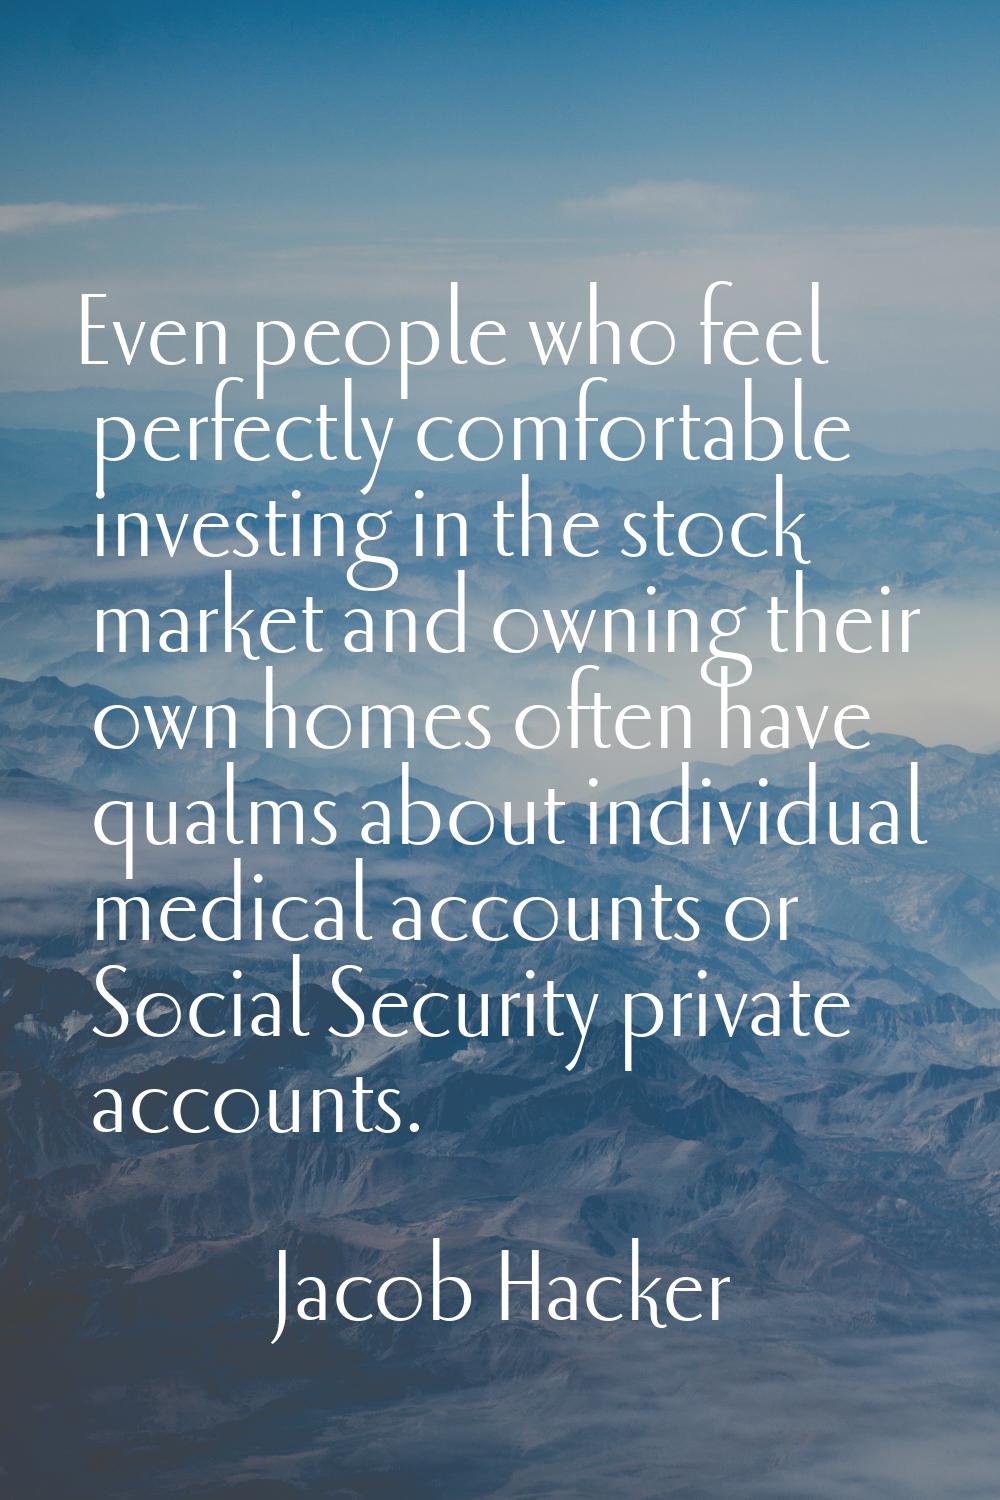 Even people who feel perfectly comfortable investing in the stock market and owning their own homes